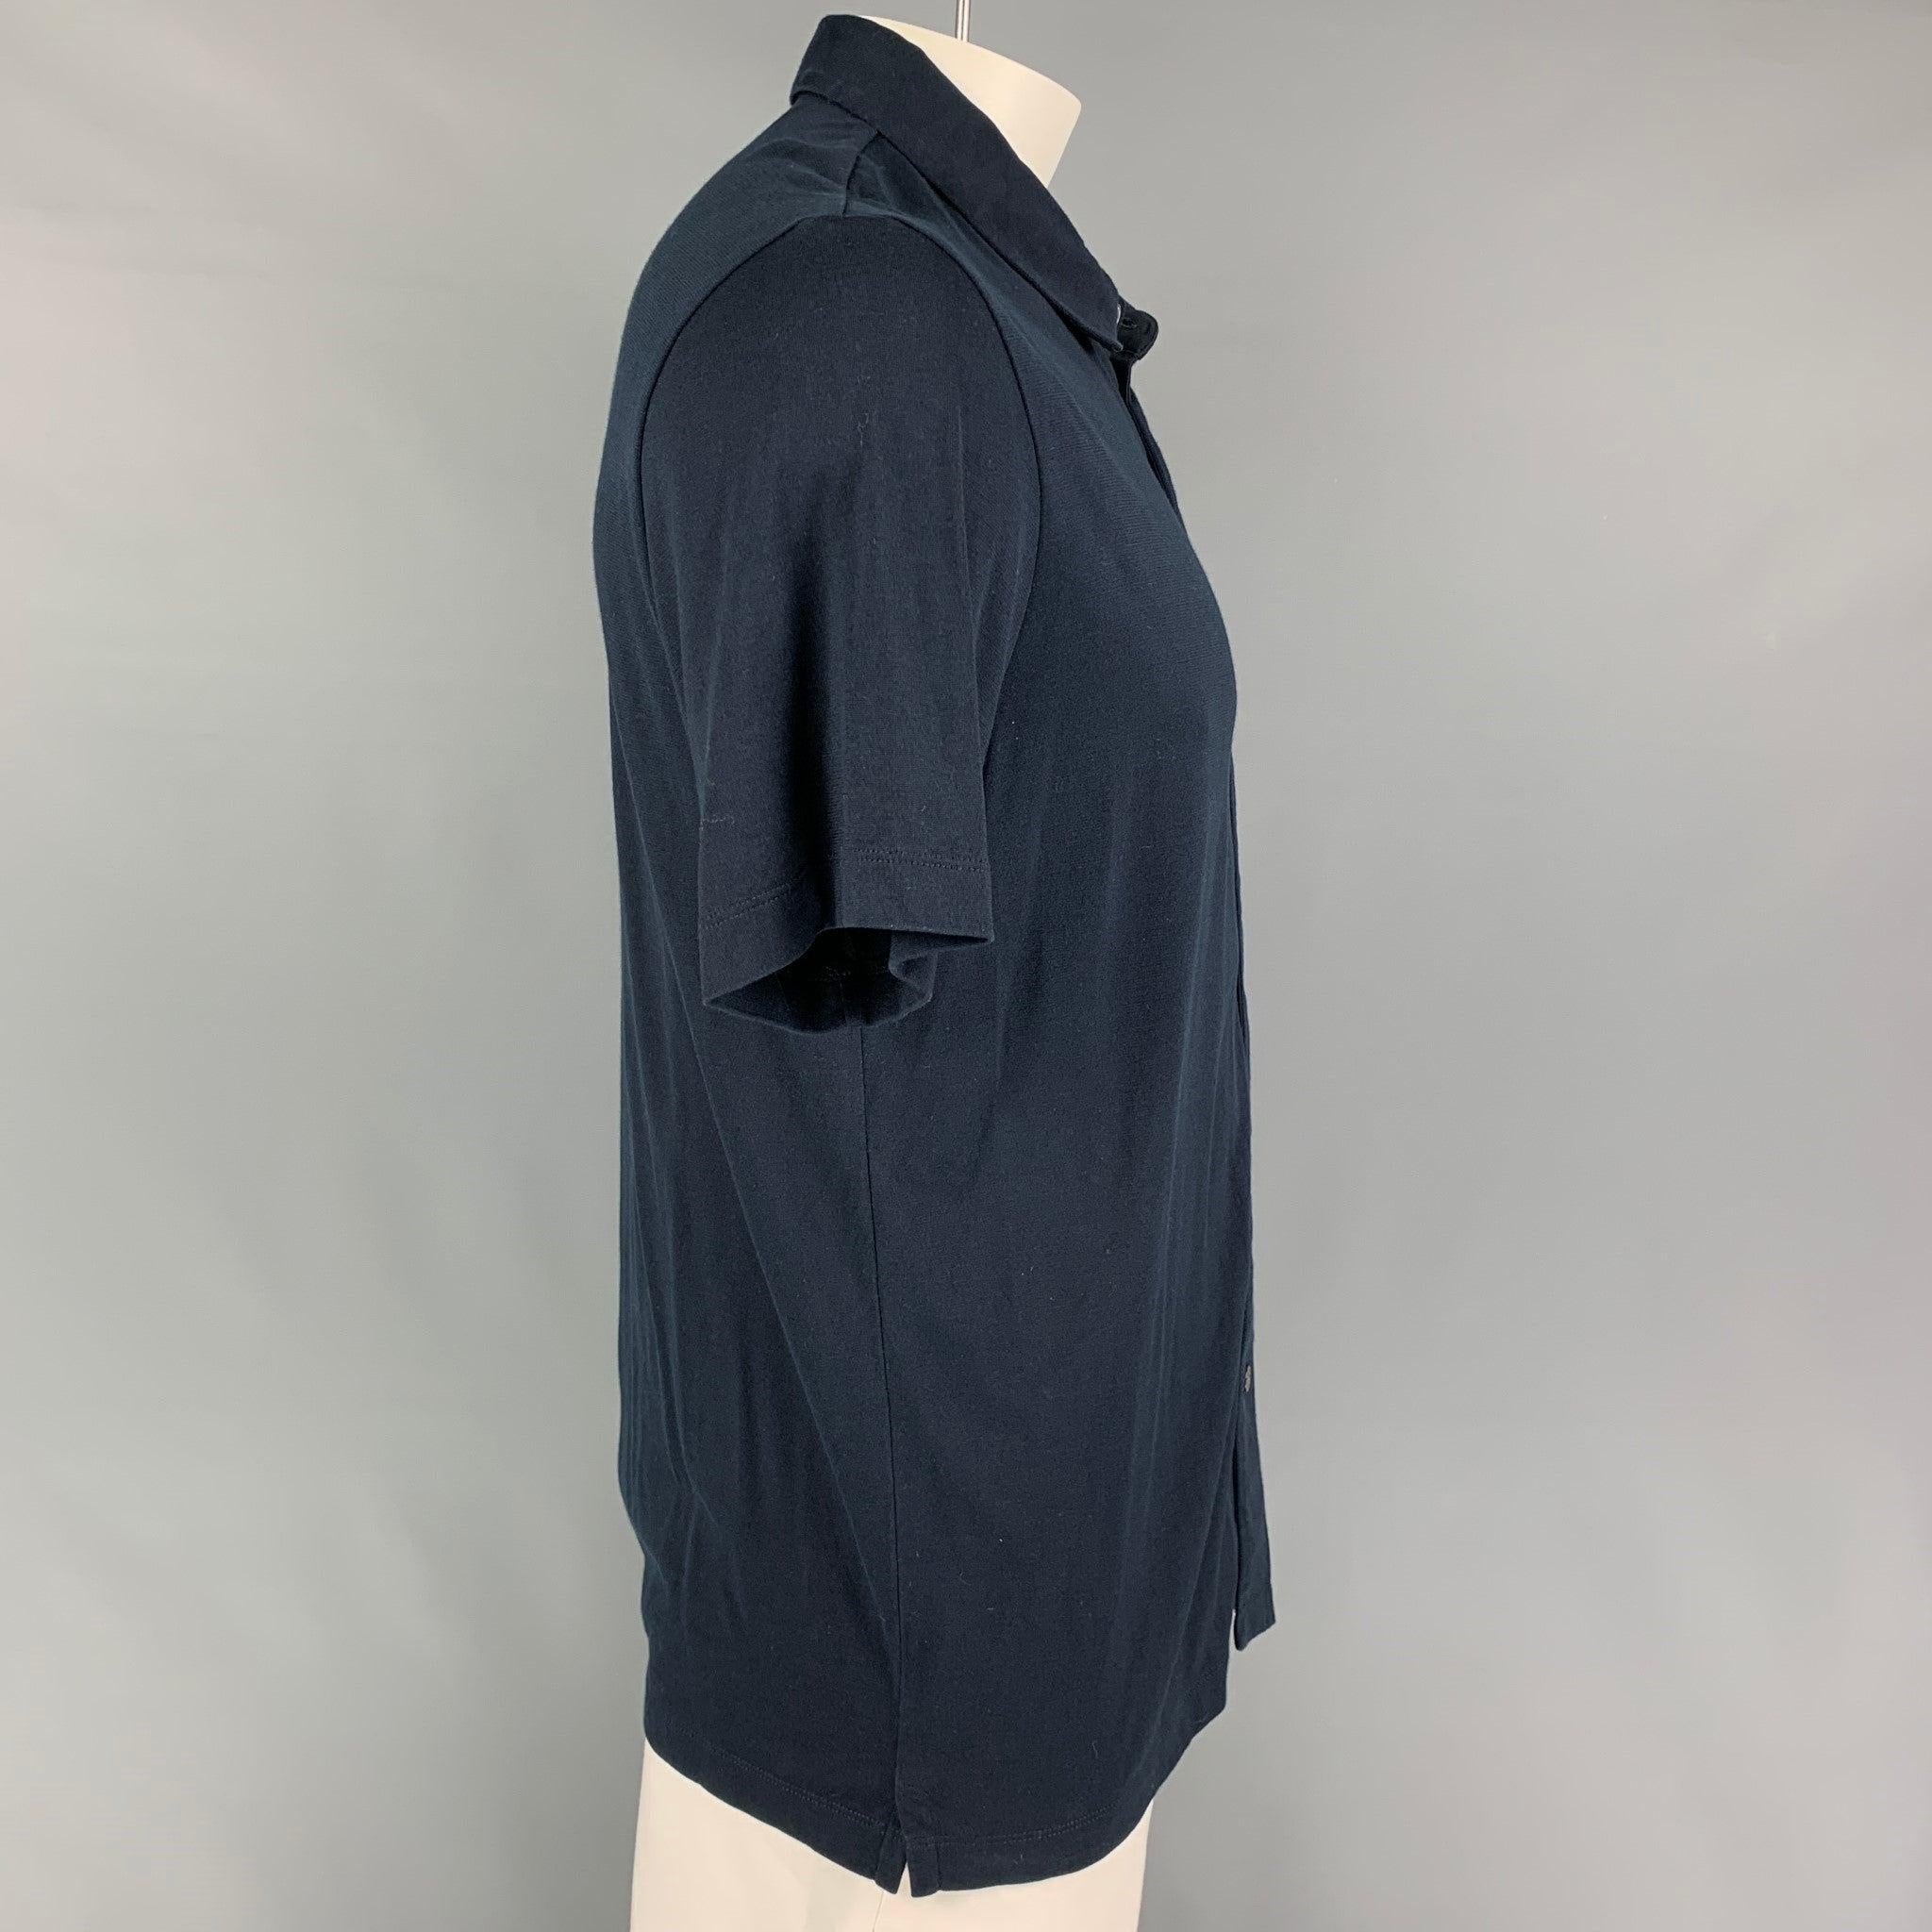 THEORY short sleeve shirt comes in a navy silk / cotton featuring a spread collar and a button up closure.
Very Good
Pre-Owned Condition. 

Marked:   XL  

Measurements: 
 
Shoulder: 19.5 inches  Chest: 42 inches  Sleeve: 10.5 inches  Length: 30